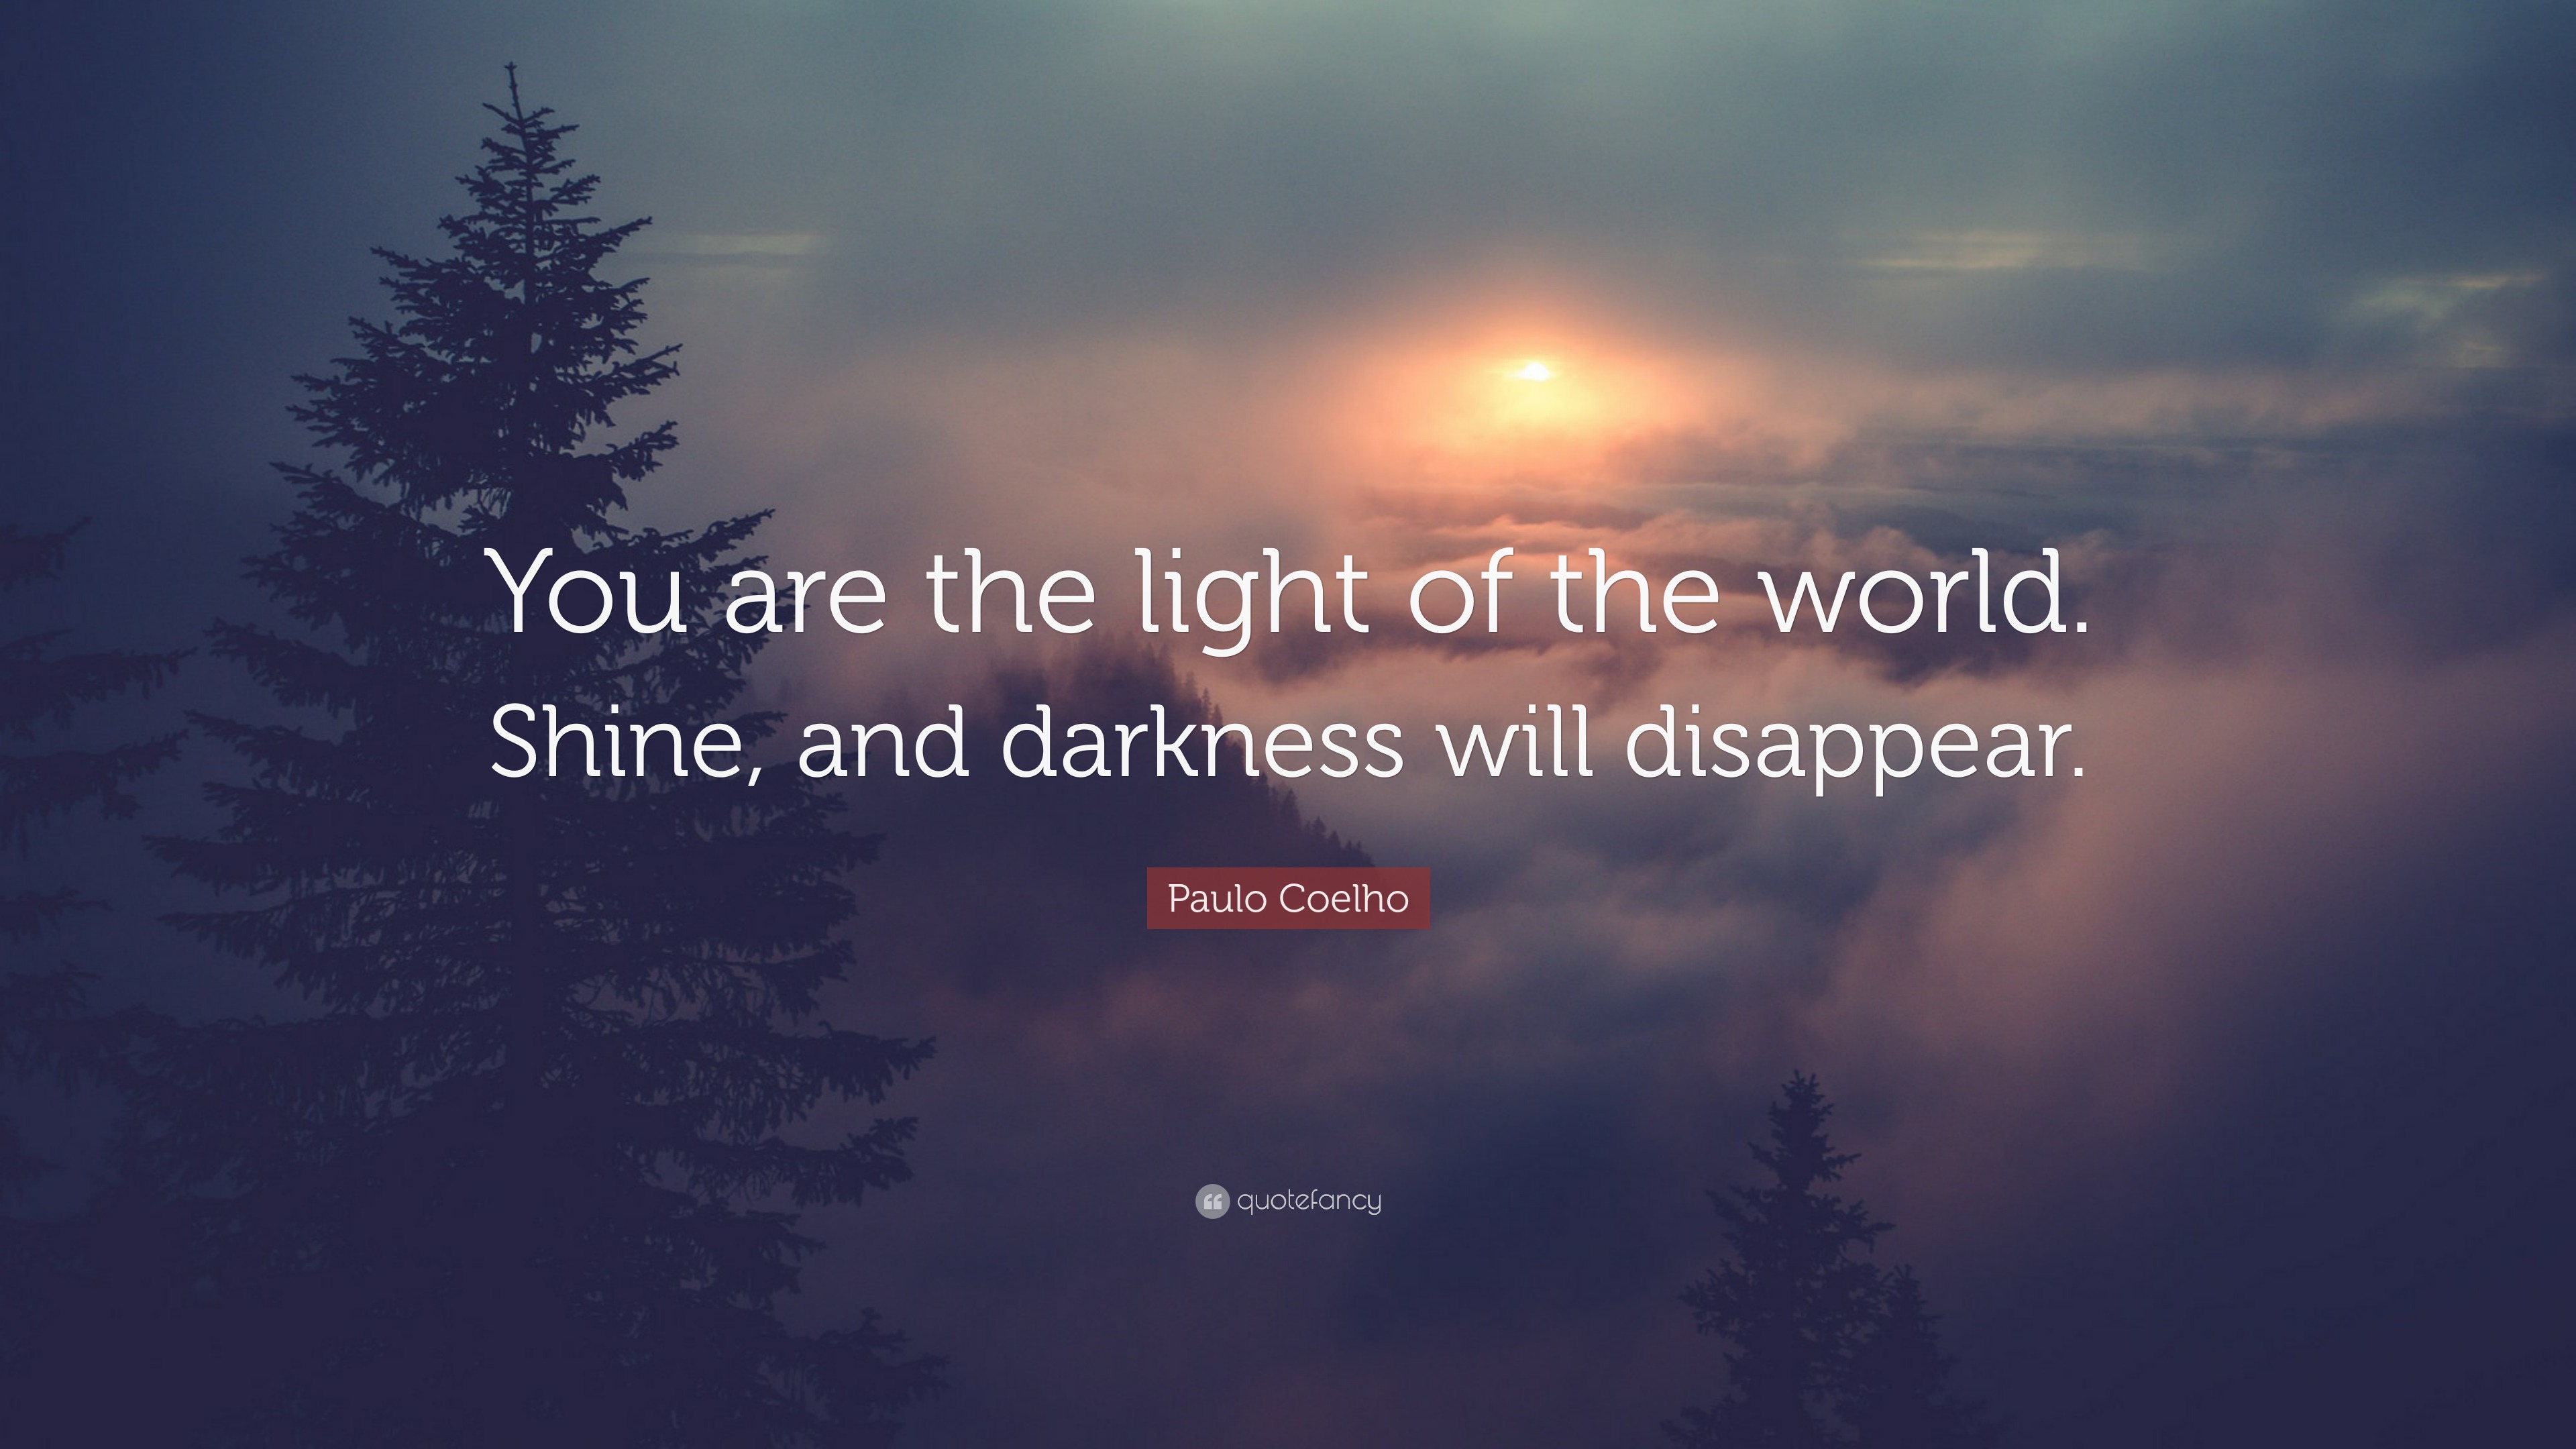 Paulo Coelho Quote: “You are the light of the world. Shine, and ...